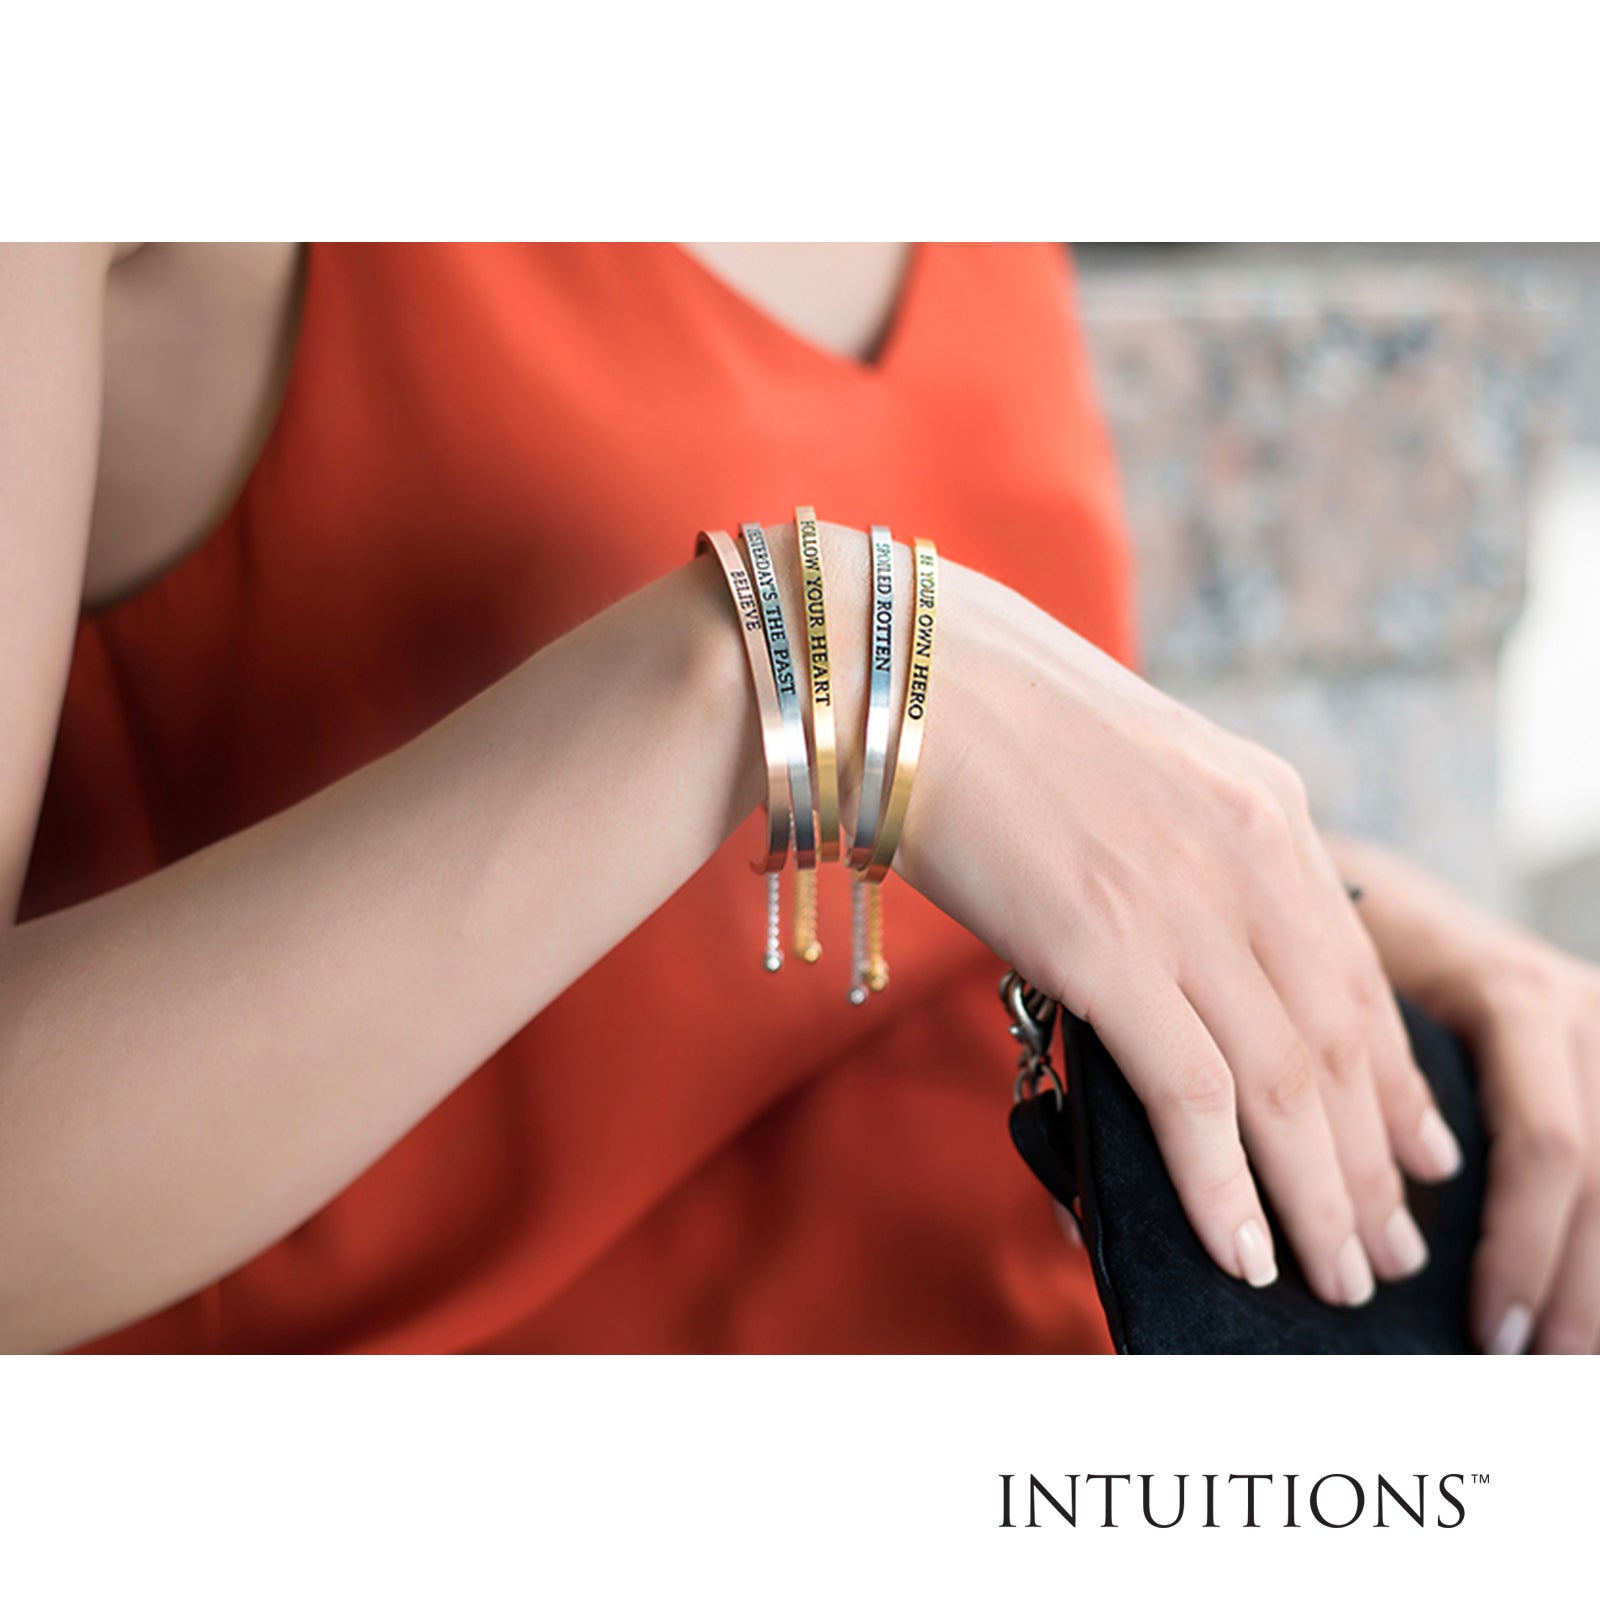 Intuitions Stainless Steel DREAM IT BELIEVE IT ACHIEVE IT Diamond Accent Cuff Bangle Bracelet fine designer jewelry for men and women